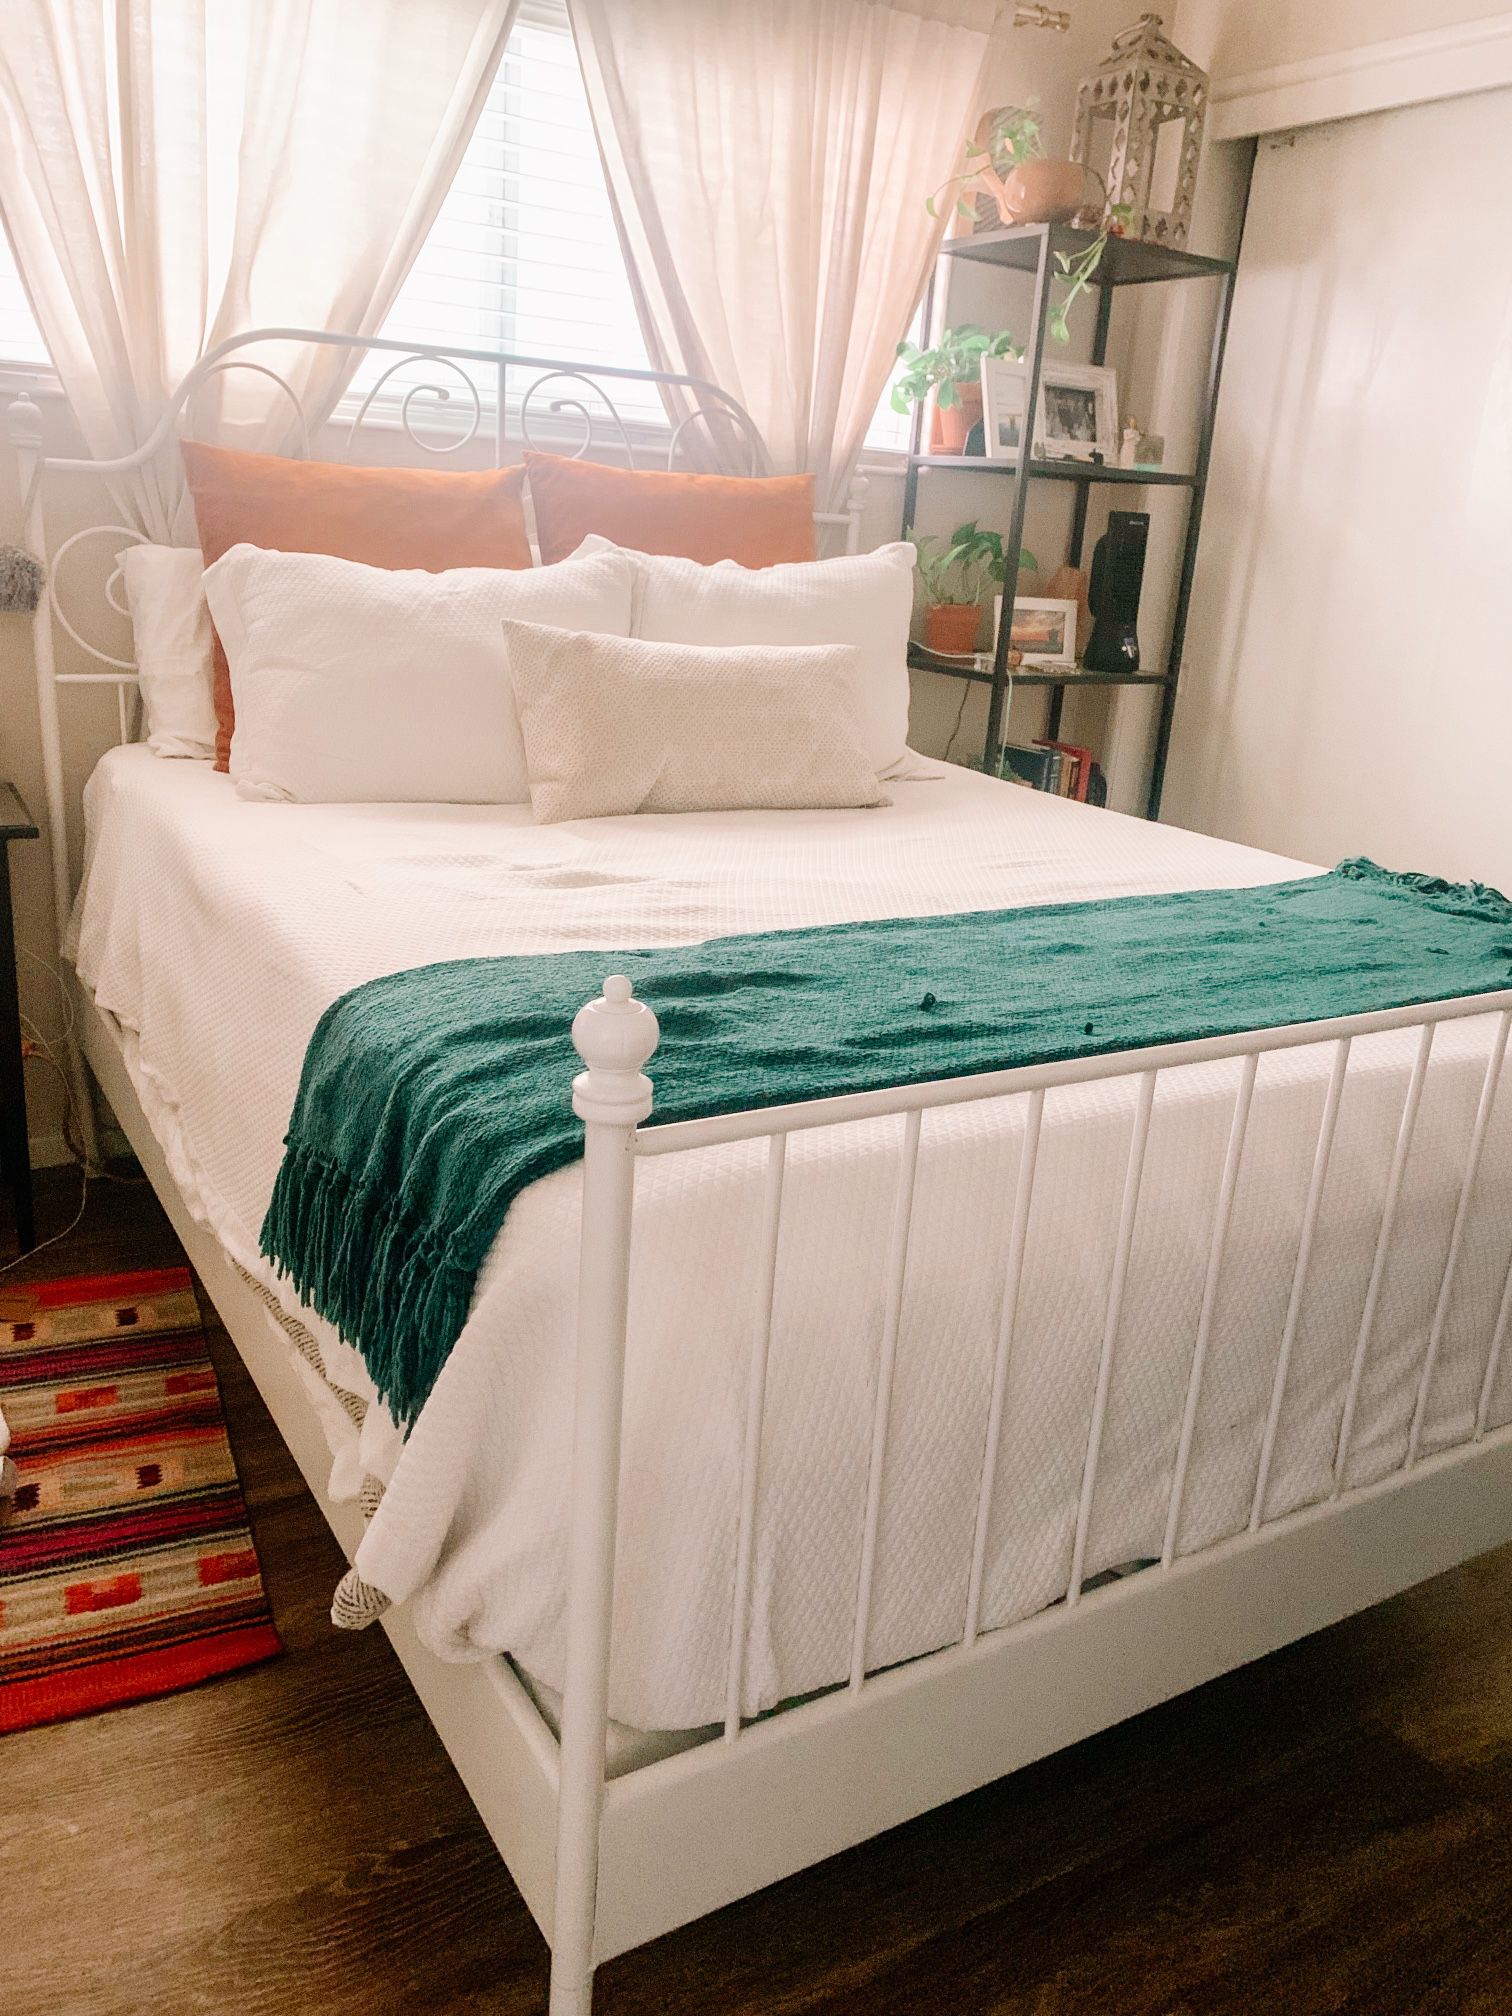 White IKEA Queen Bed Frame